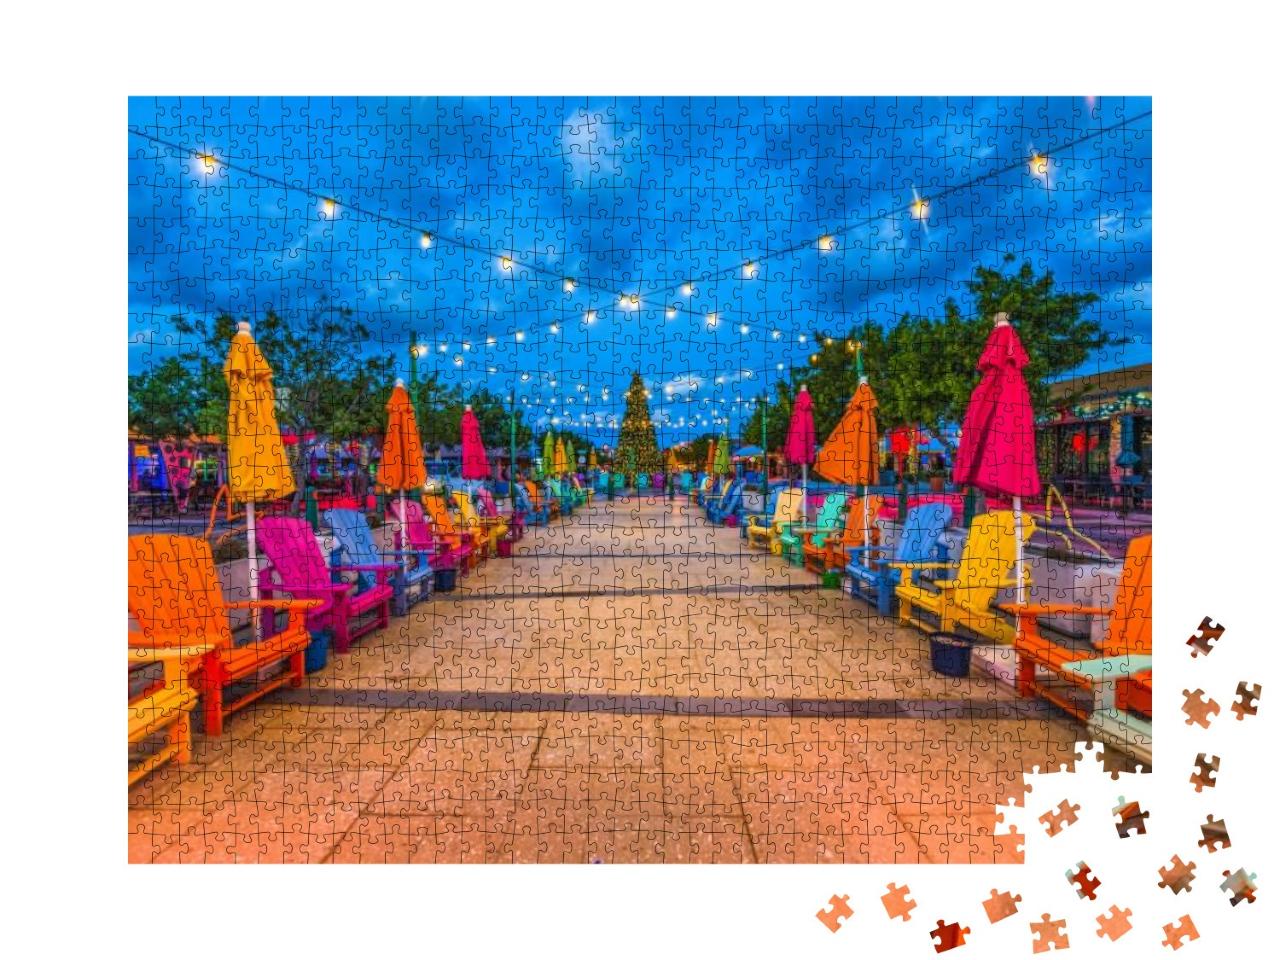 Lauderdale by the Sea Near Fort Lauderdale Florida... Jigsaw Puzzle with 1000 pieces